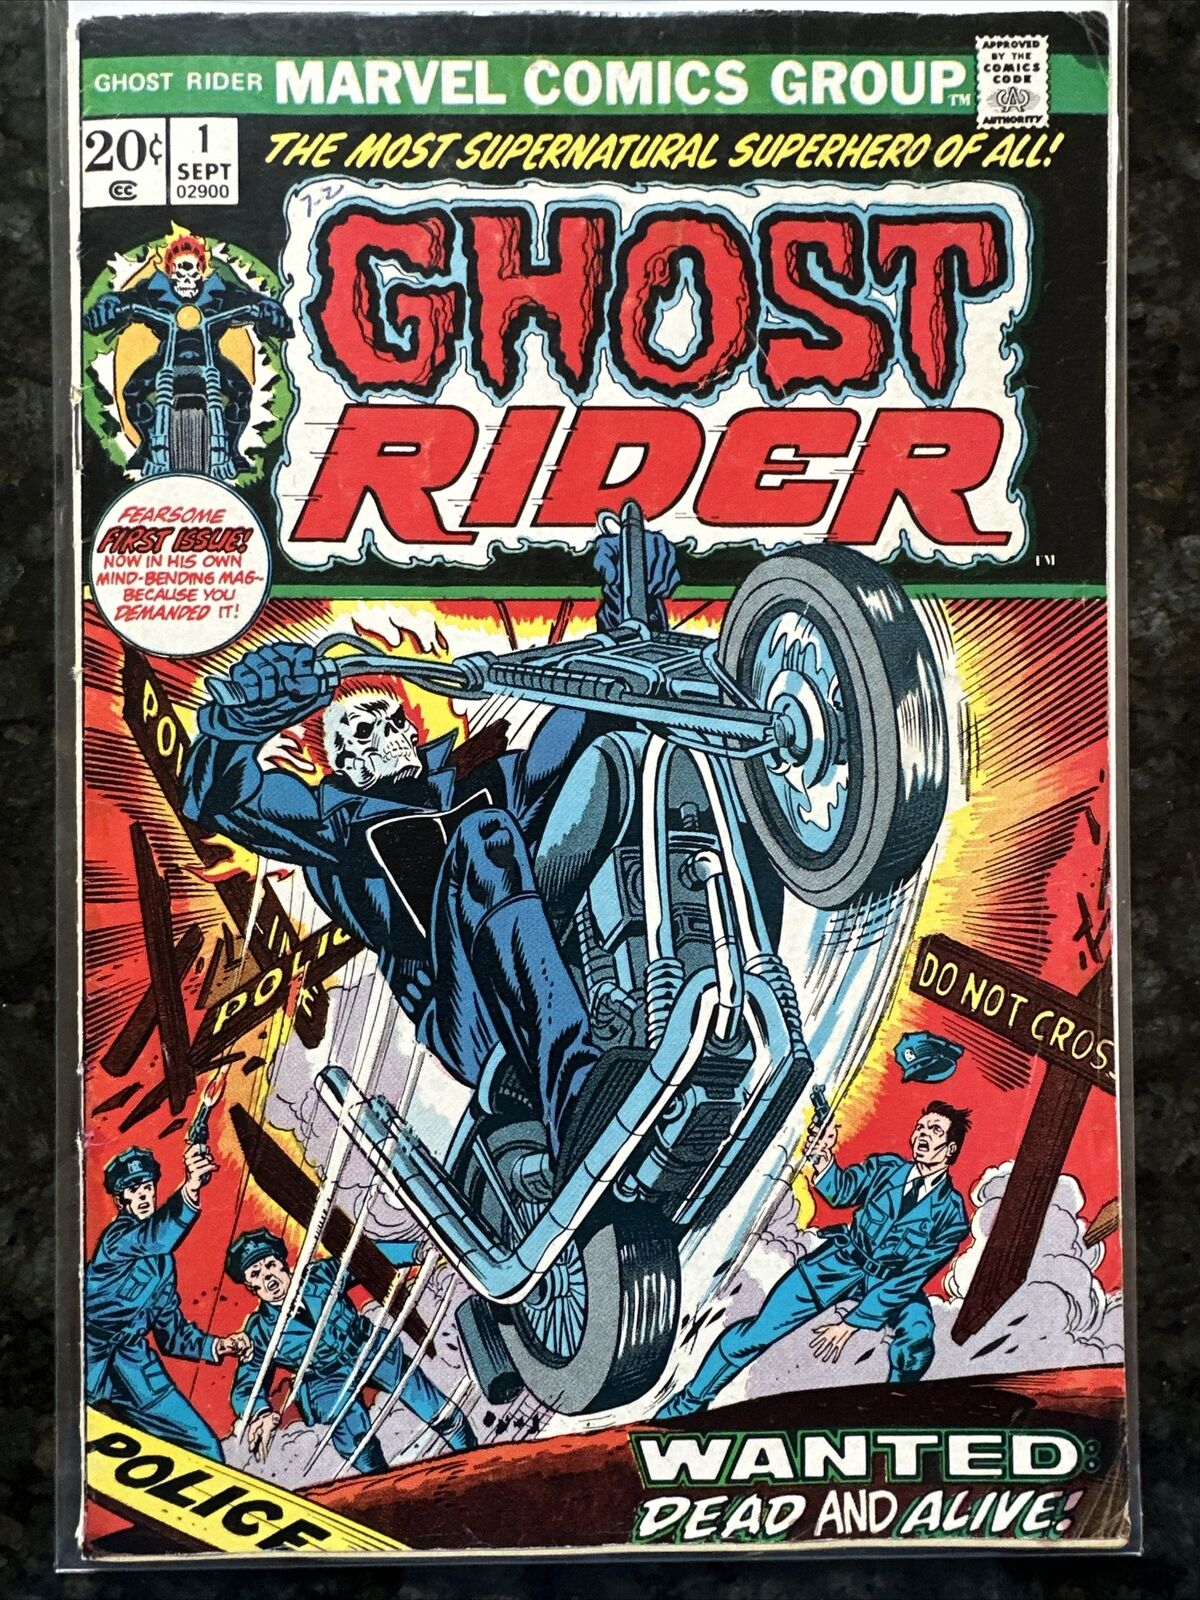 Ghost Rider #1 1973 Key Marvel Comic Book 1st Solo Series Featuring Ghost Rider